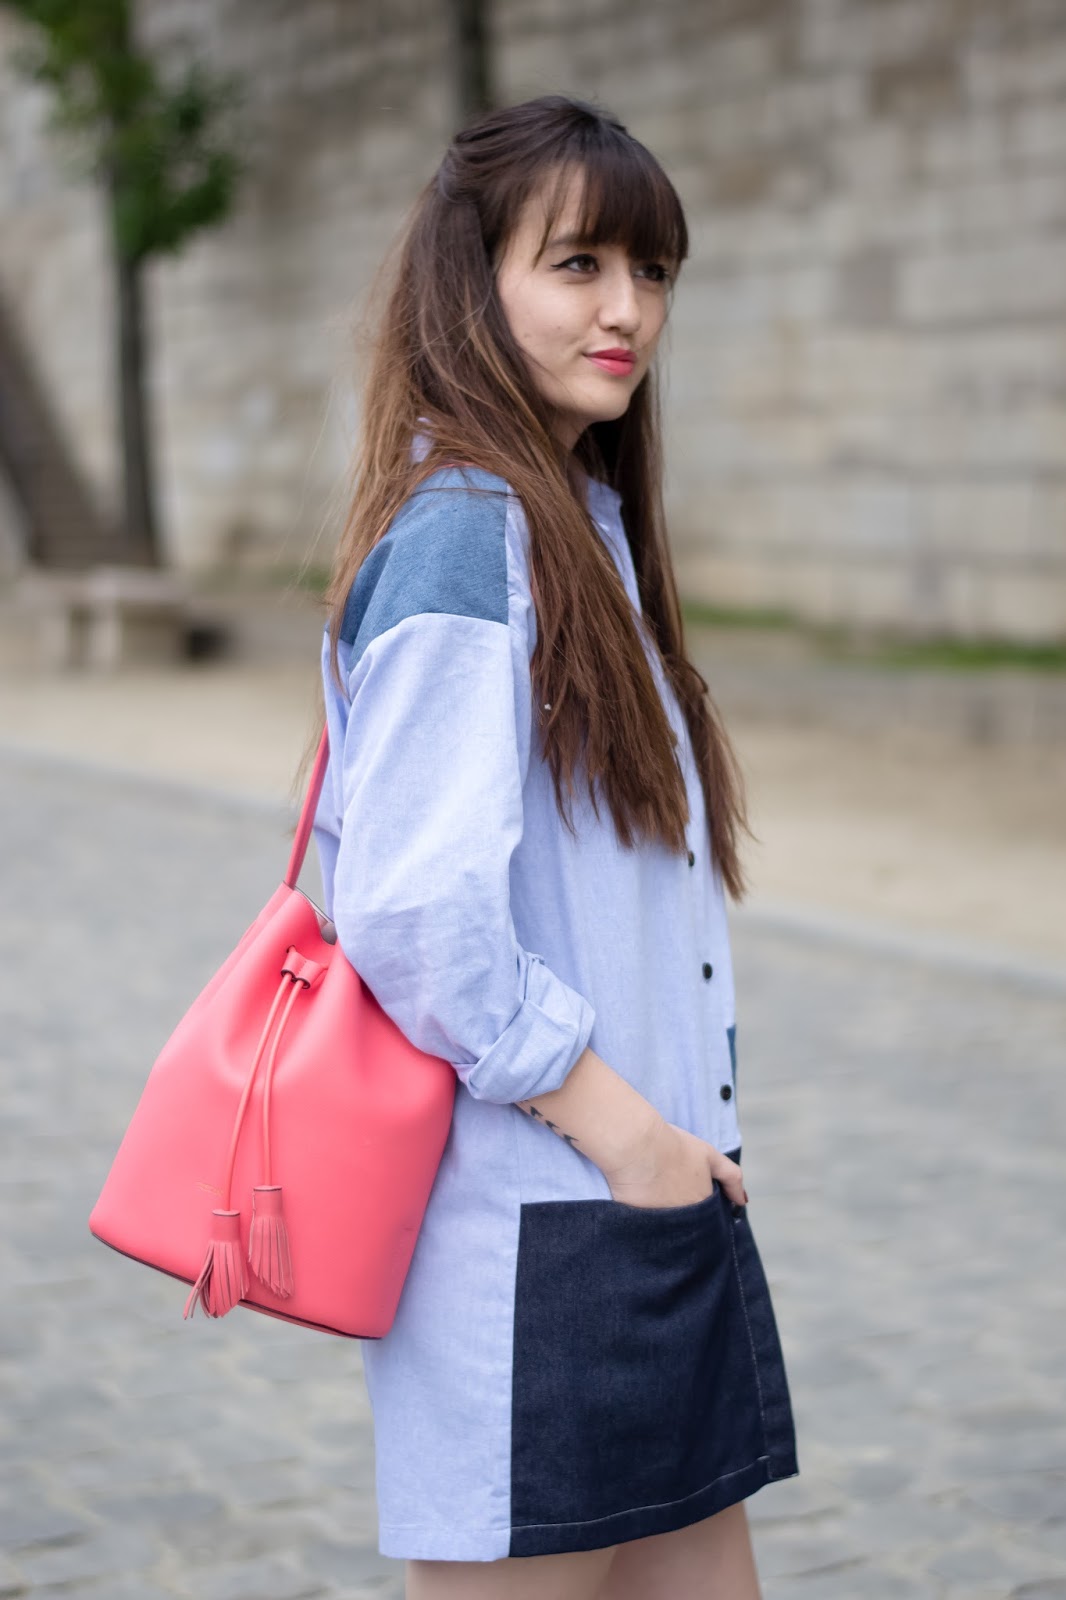 streetstyle, paris, look, mode, fashion, chic parisian style, cool, casual style, meet me in paree